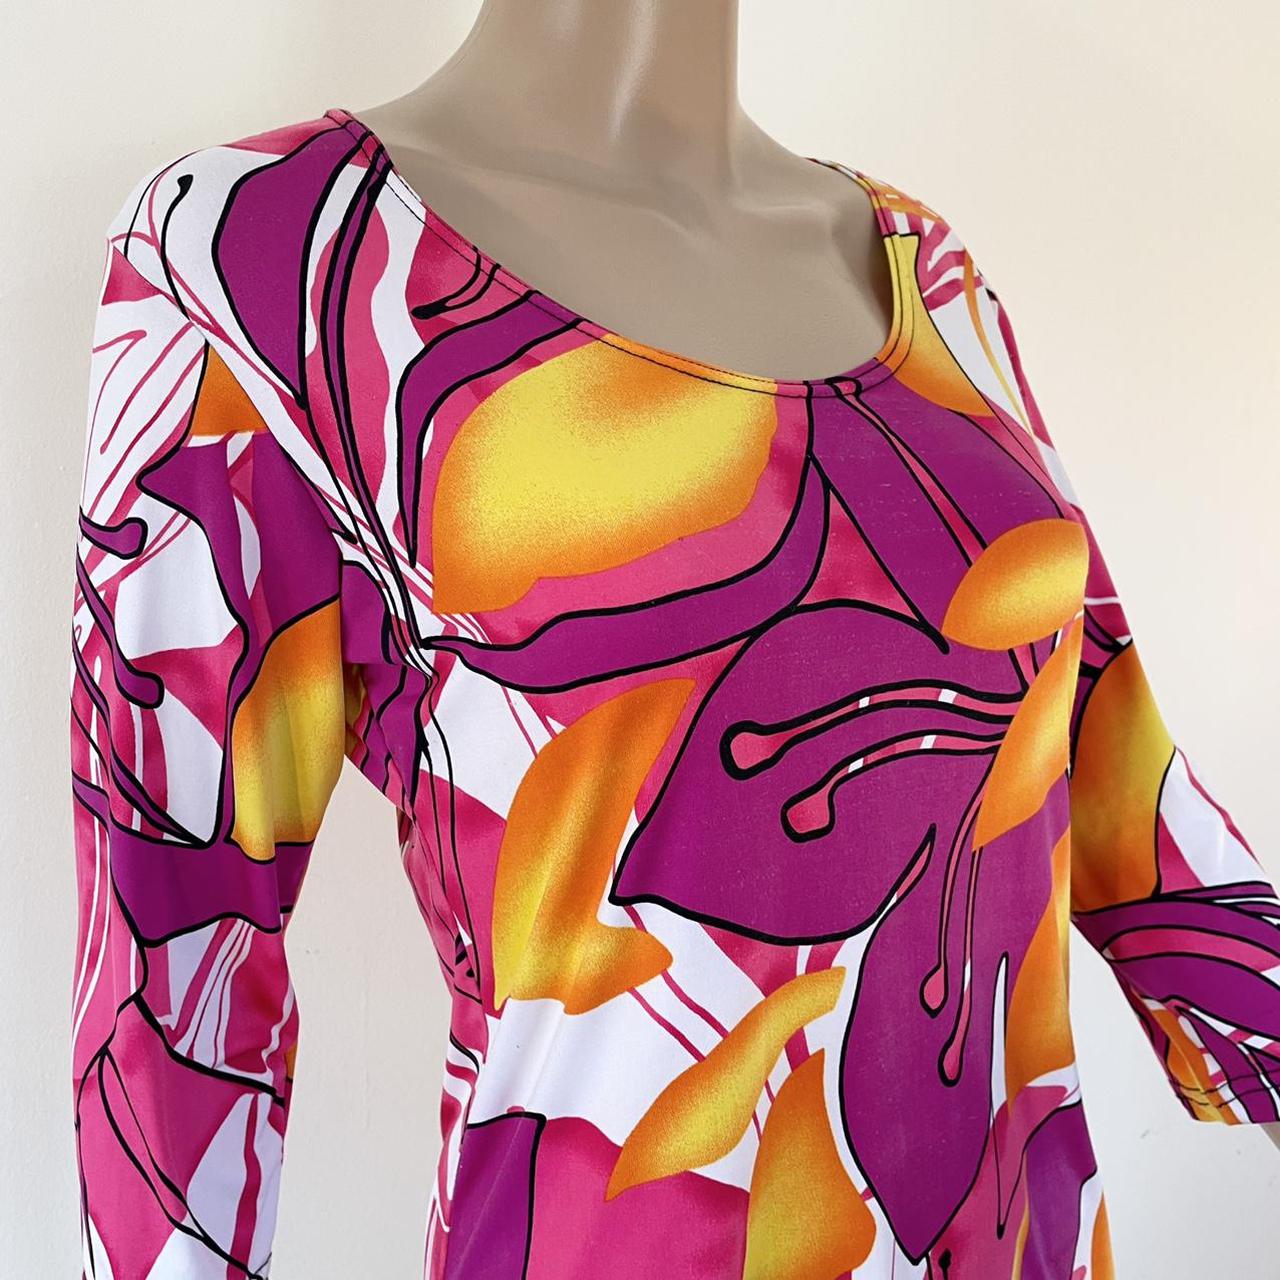 Product Image 2 - Vintage '90s Hawaiian Top

By "Wow"